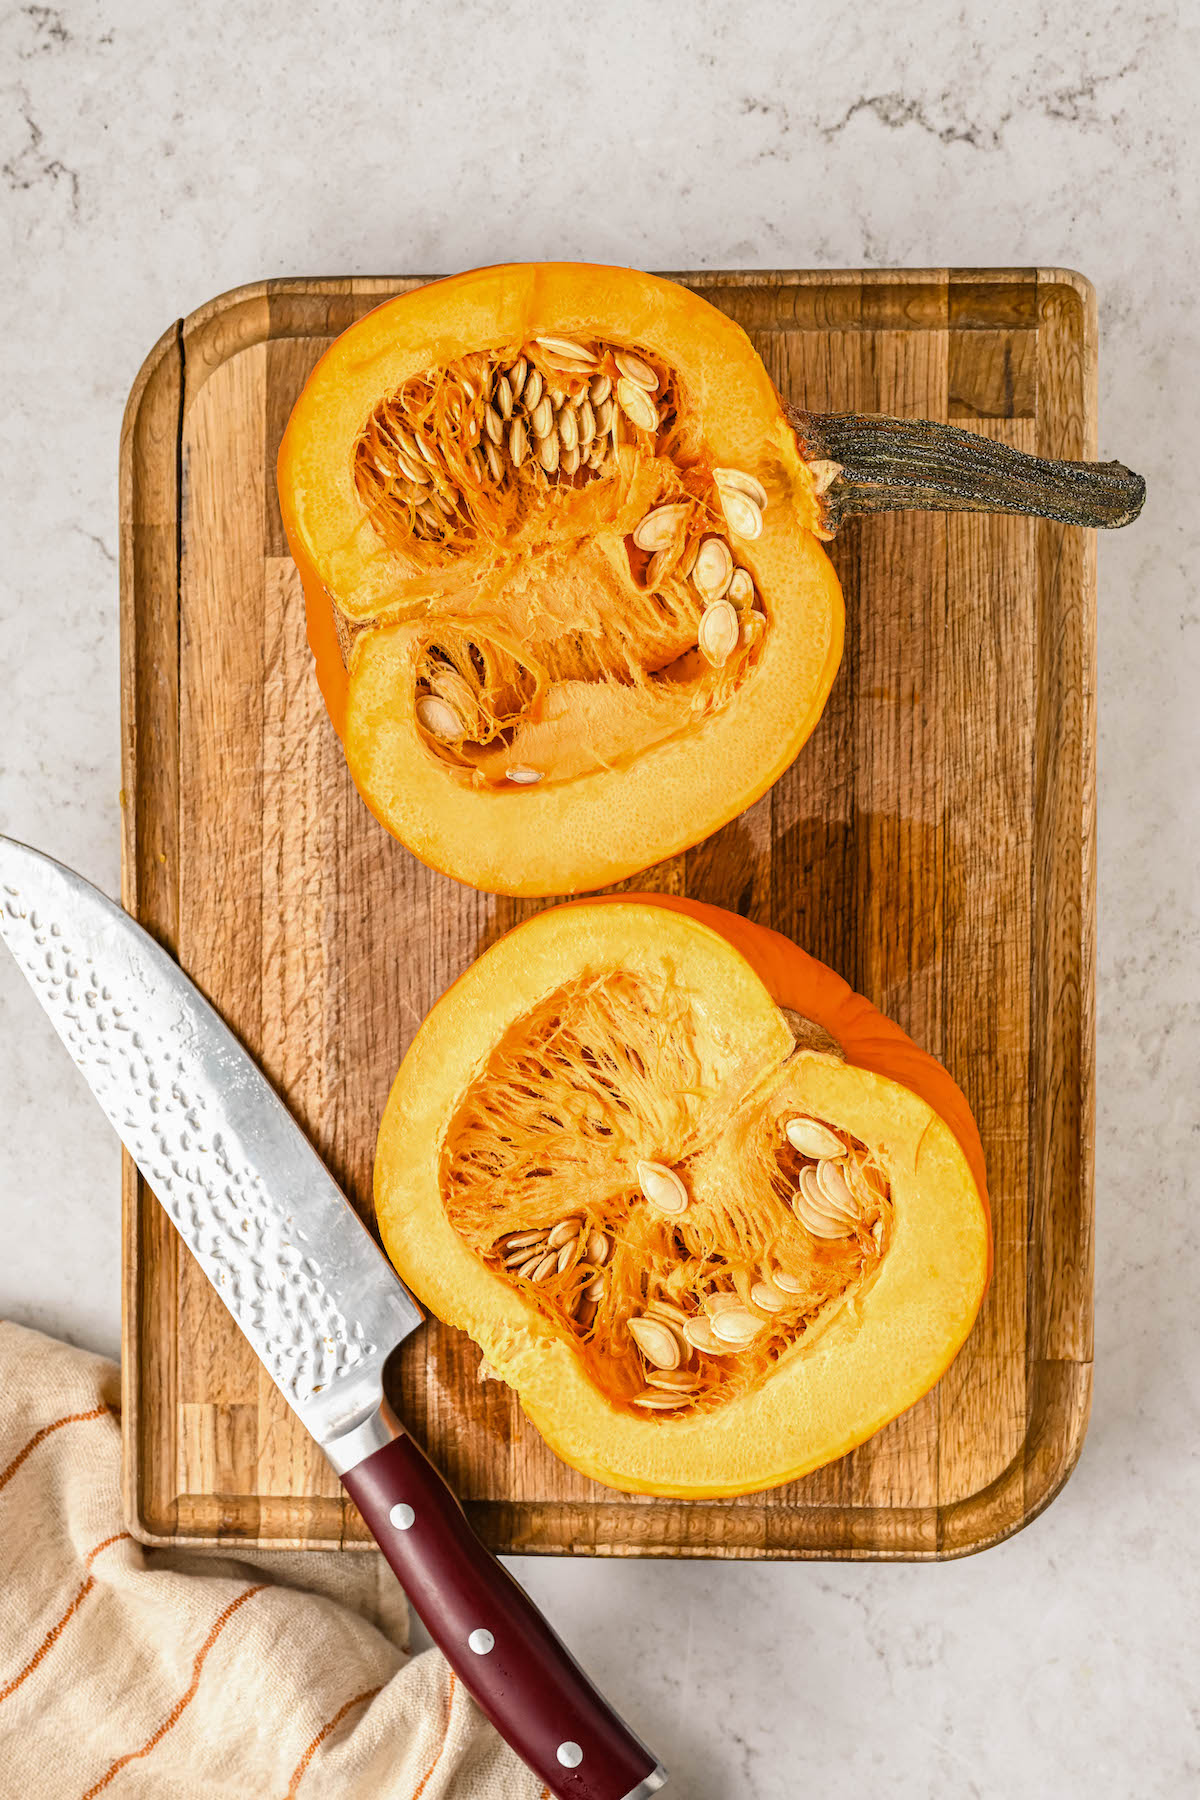 Pumpkin halves on a cutting board with a knife.